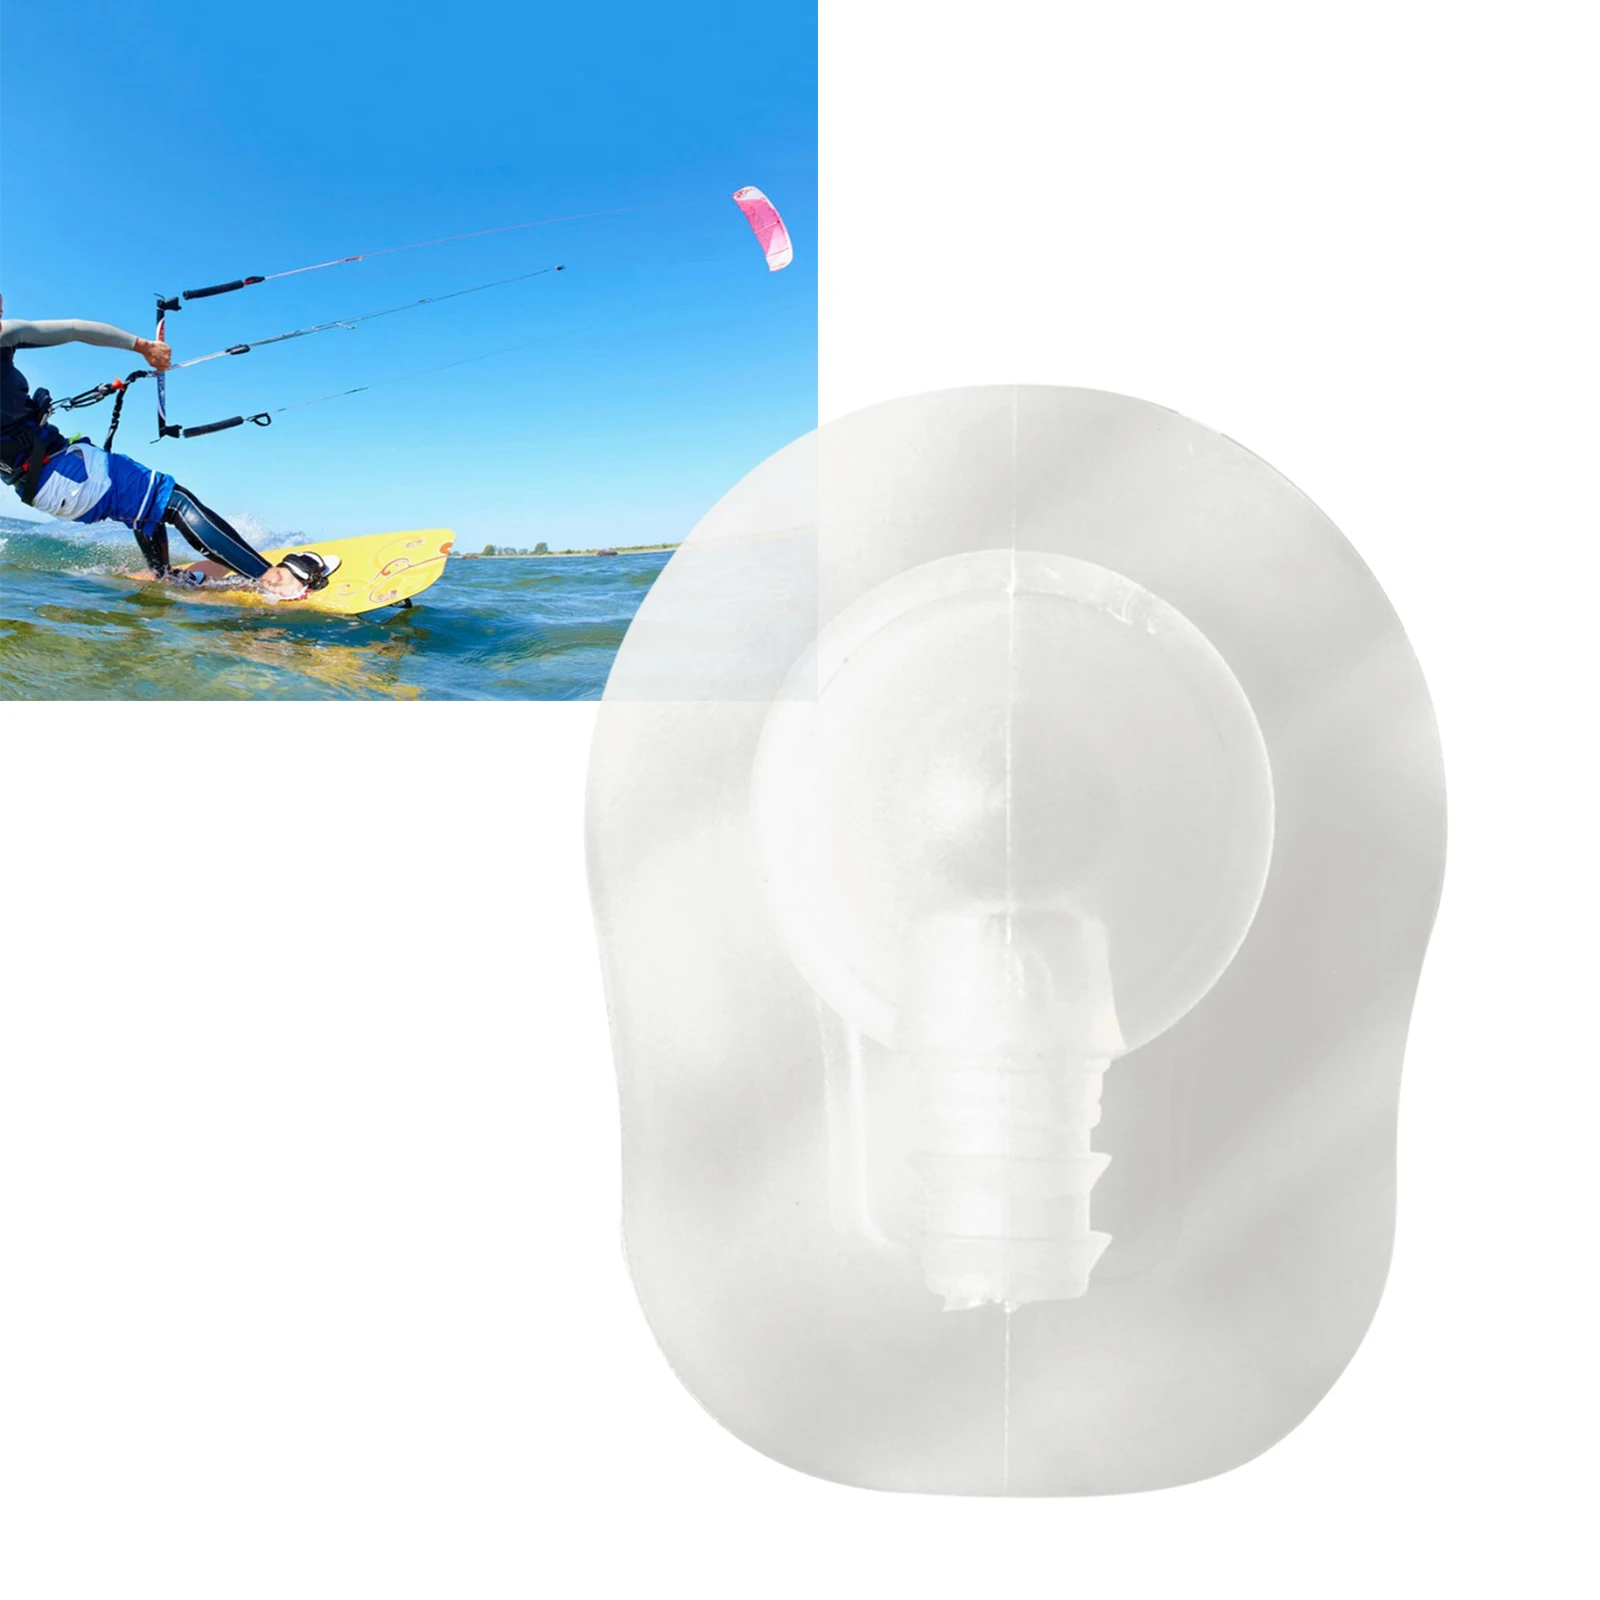 TPU Kitesurfing Kite Non-Return Inflate Valve without Self Stick for Repair